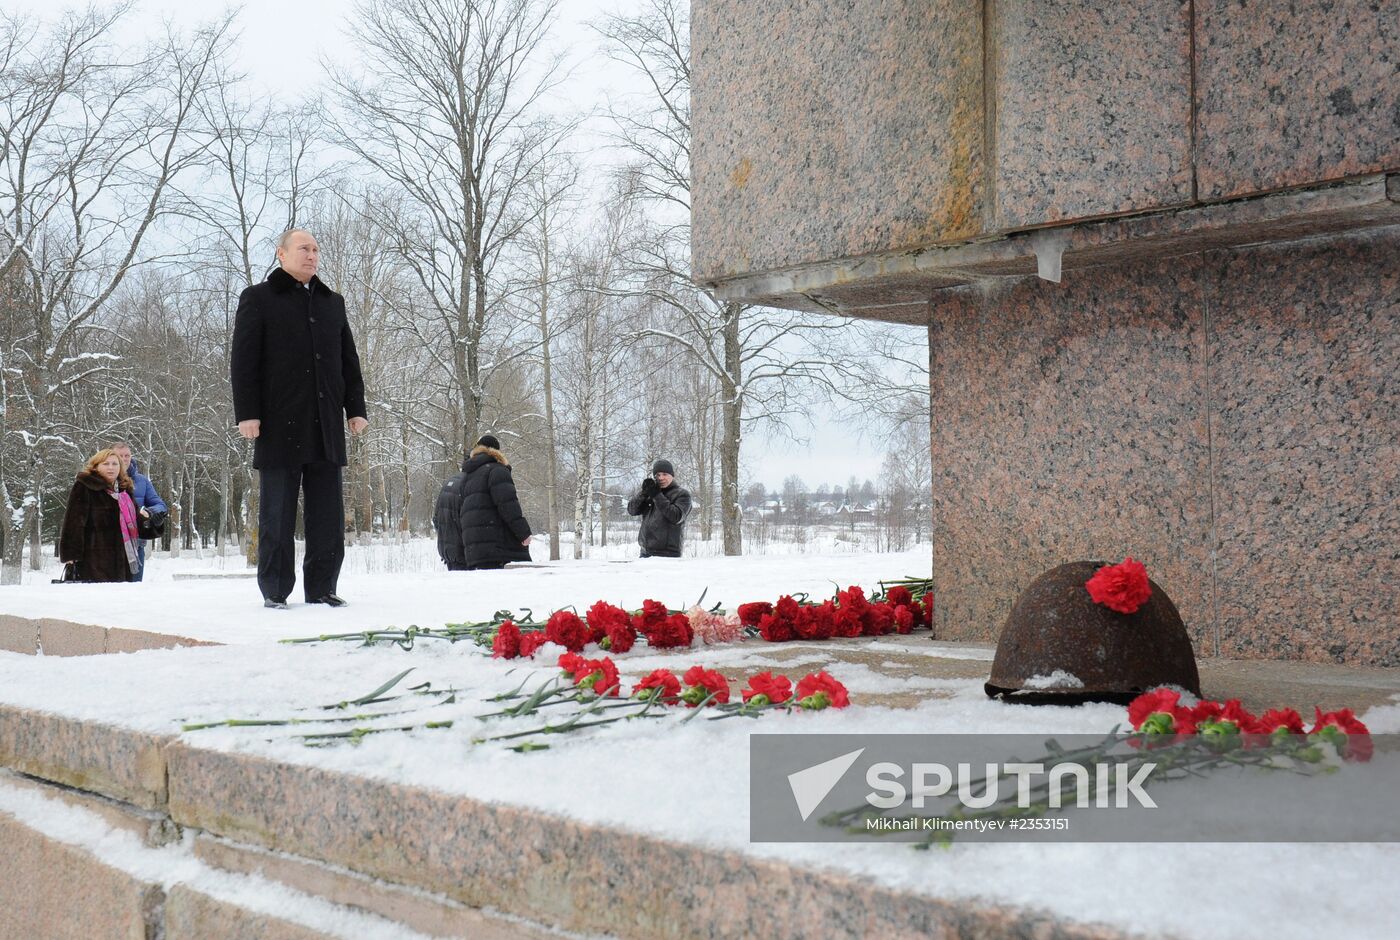 Putin attends ceremonies commemorating 70th anniversary of liberation of Leningrad from Nazi siege